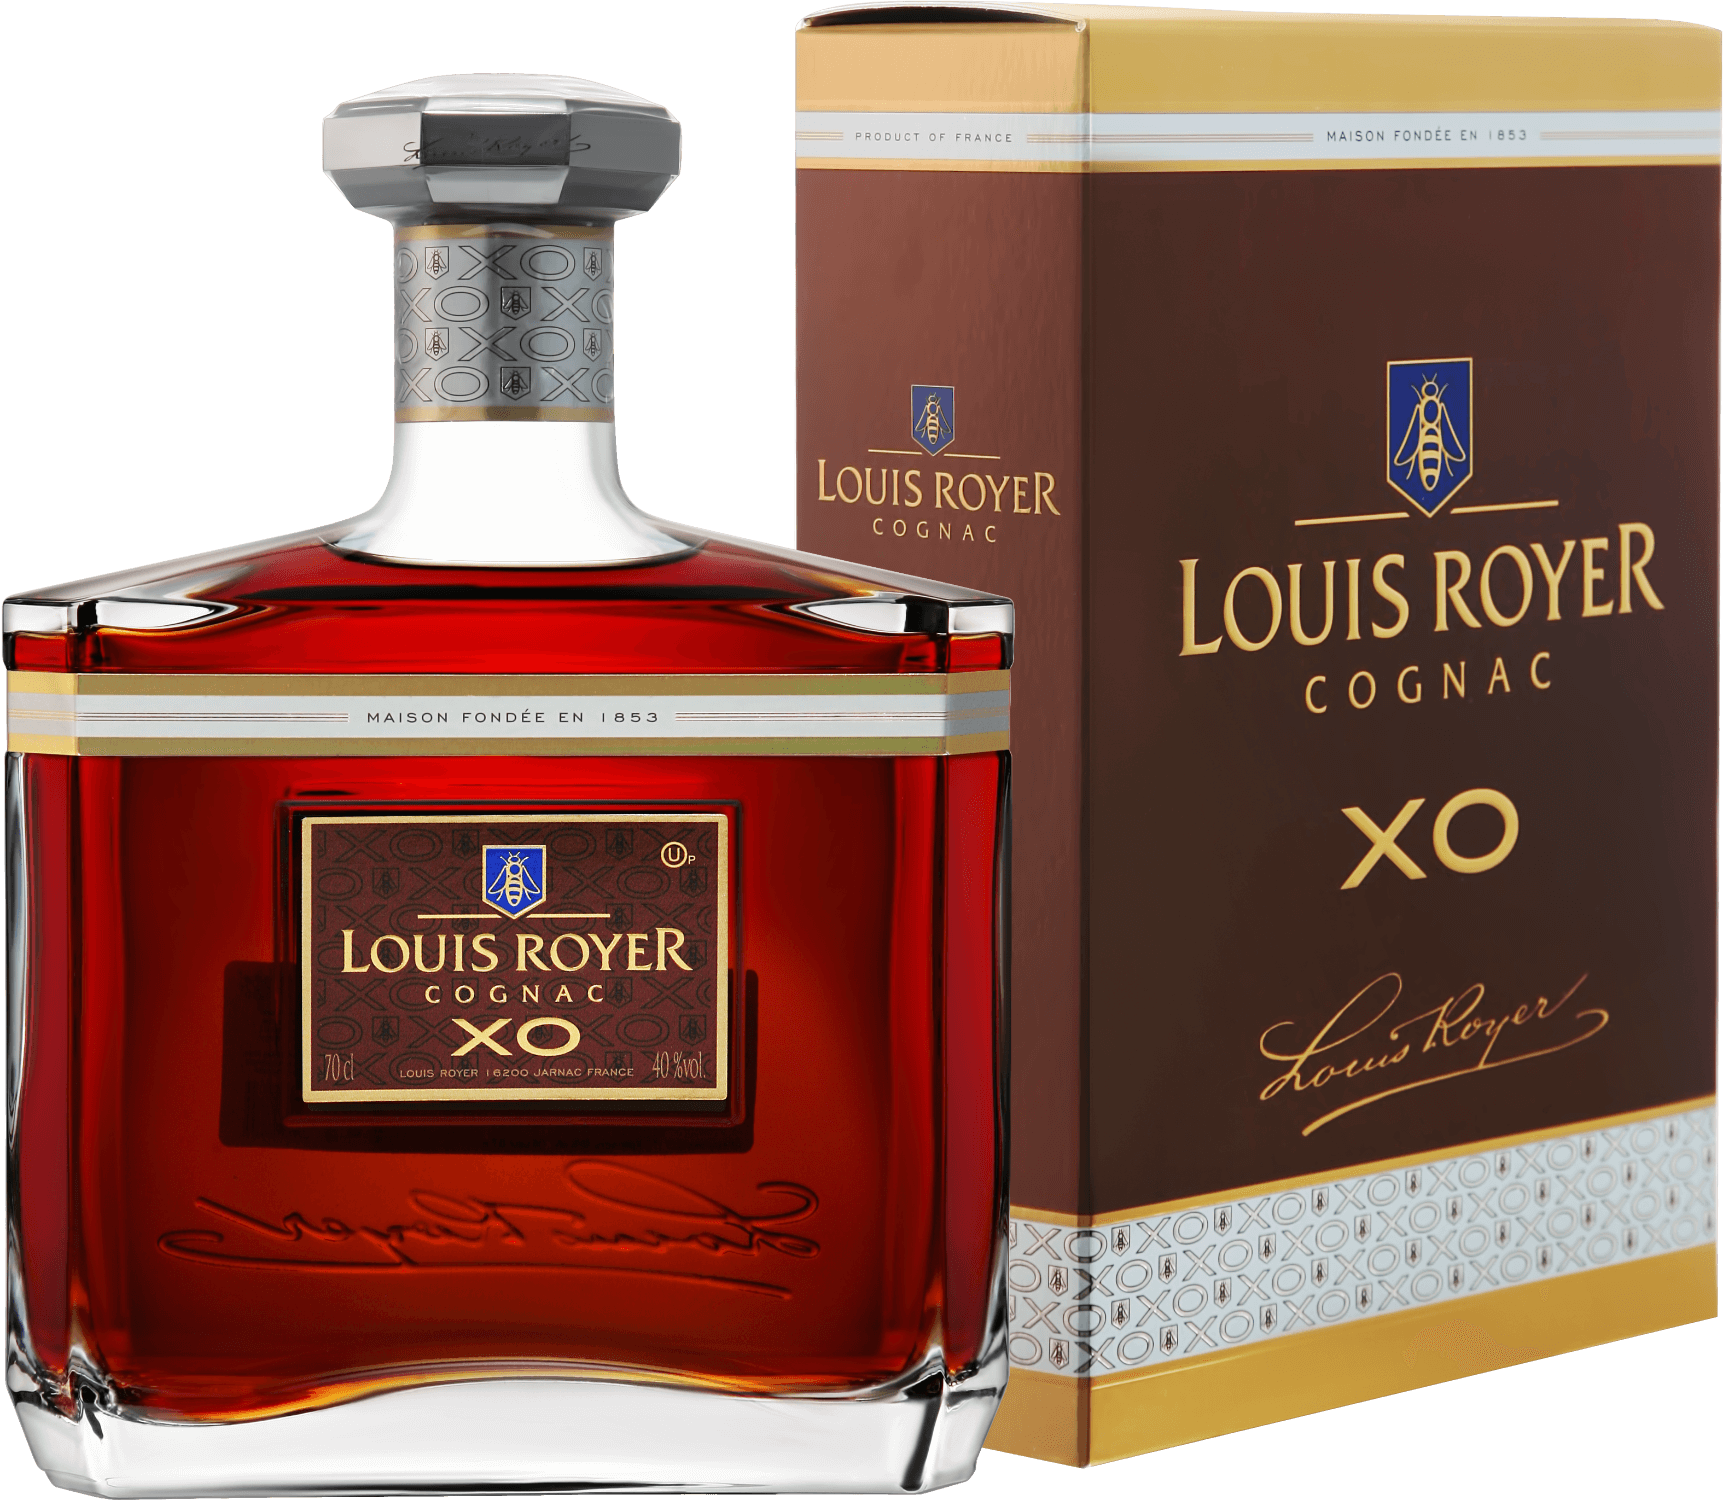 louis royer cognac grande champagne extra gift box Louis Royer Cognac XO Kosher (gift box)